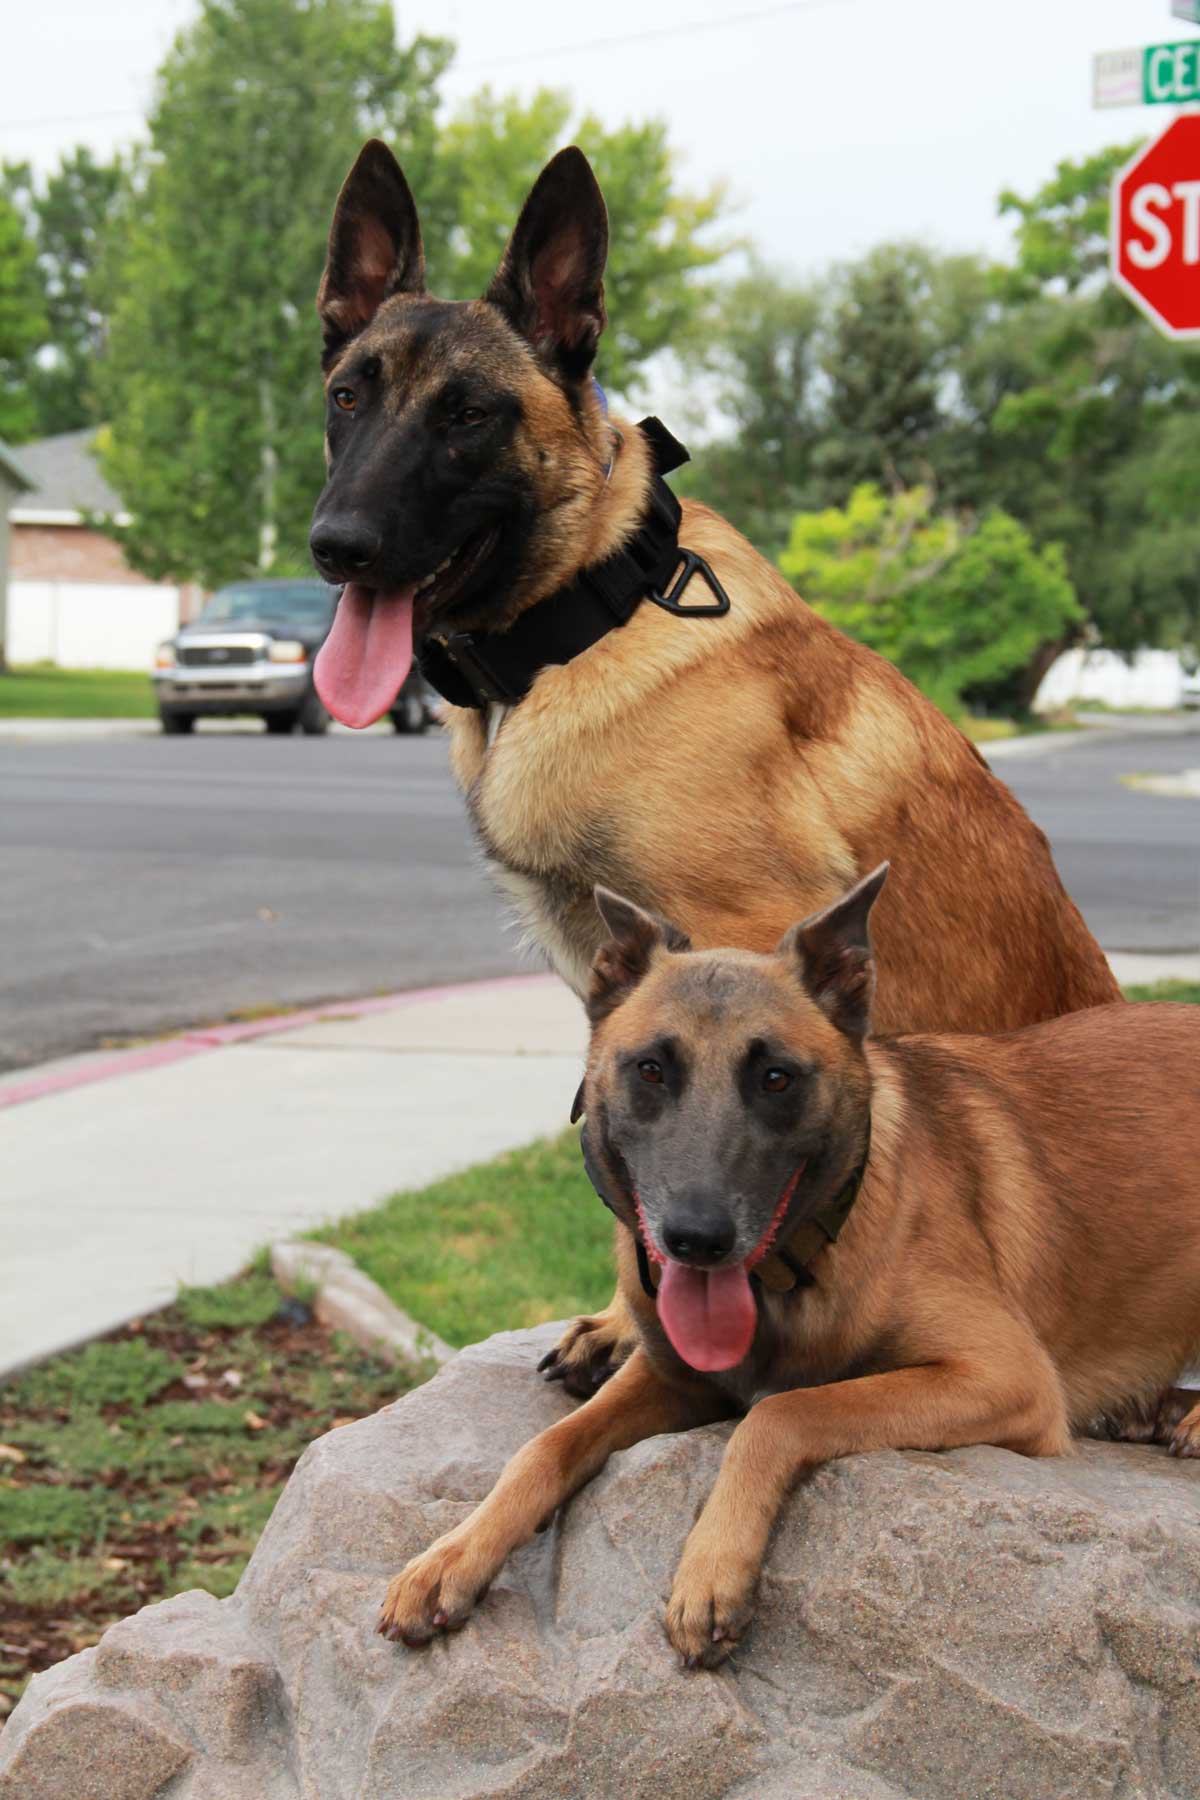 Two adorable dogs sitting on a rock - trained by professionals at Dog Training Elite in Gilbert, AZ.